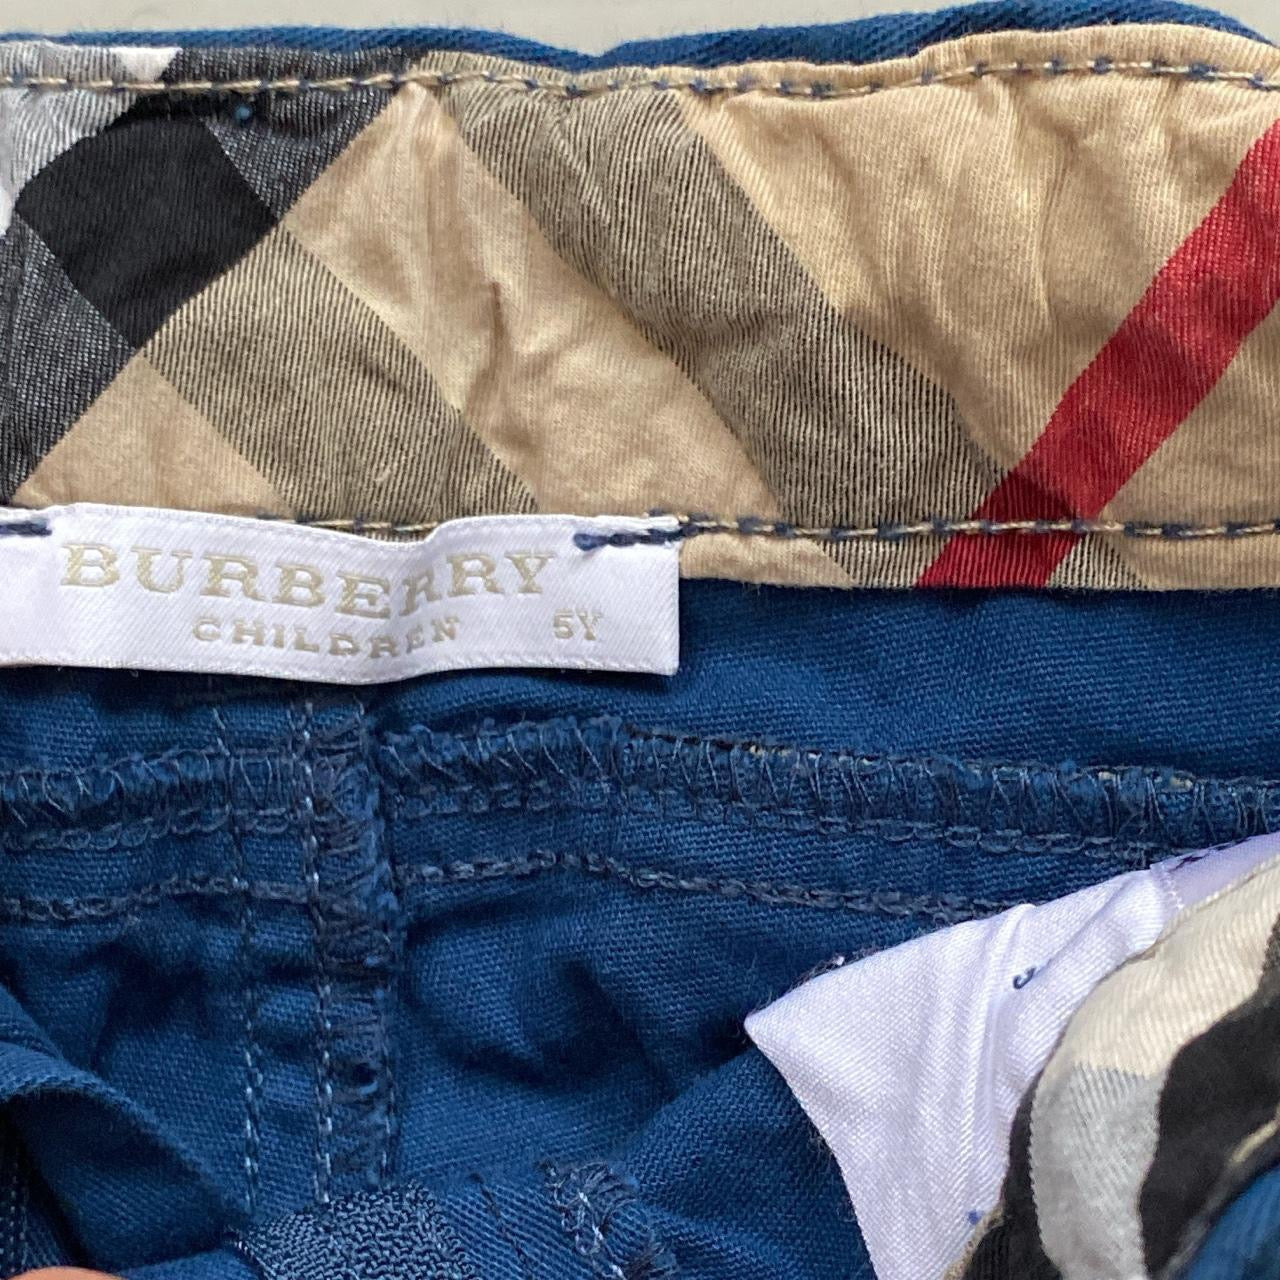 Burberry Kids Cargo Shorts (Age 6Y)